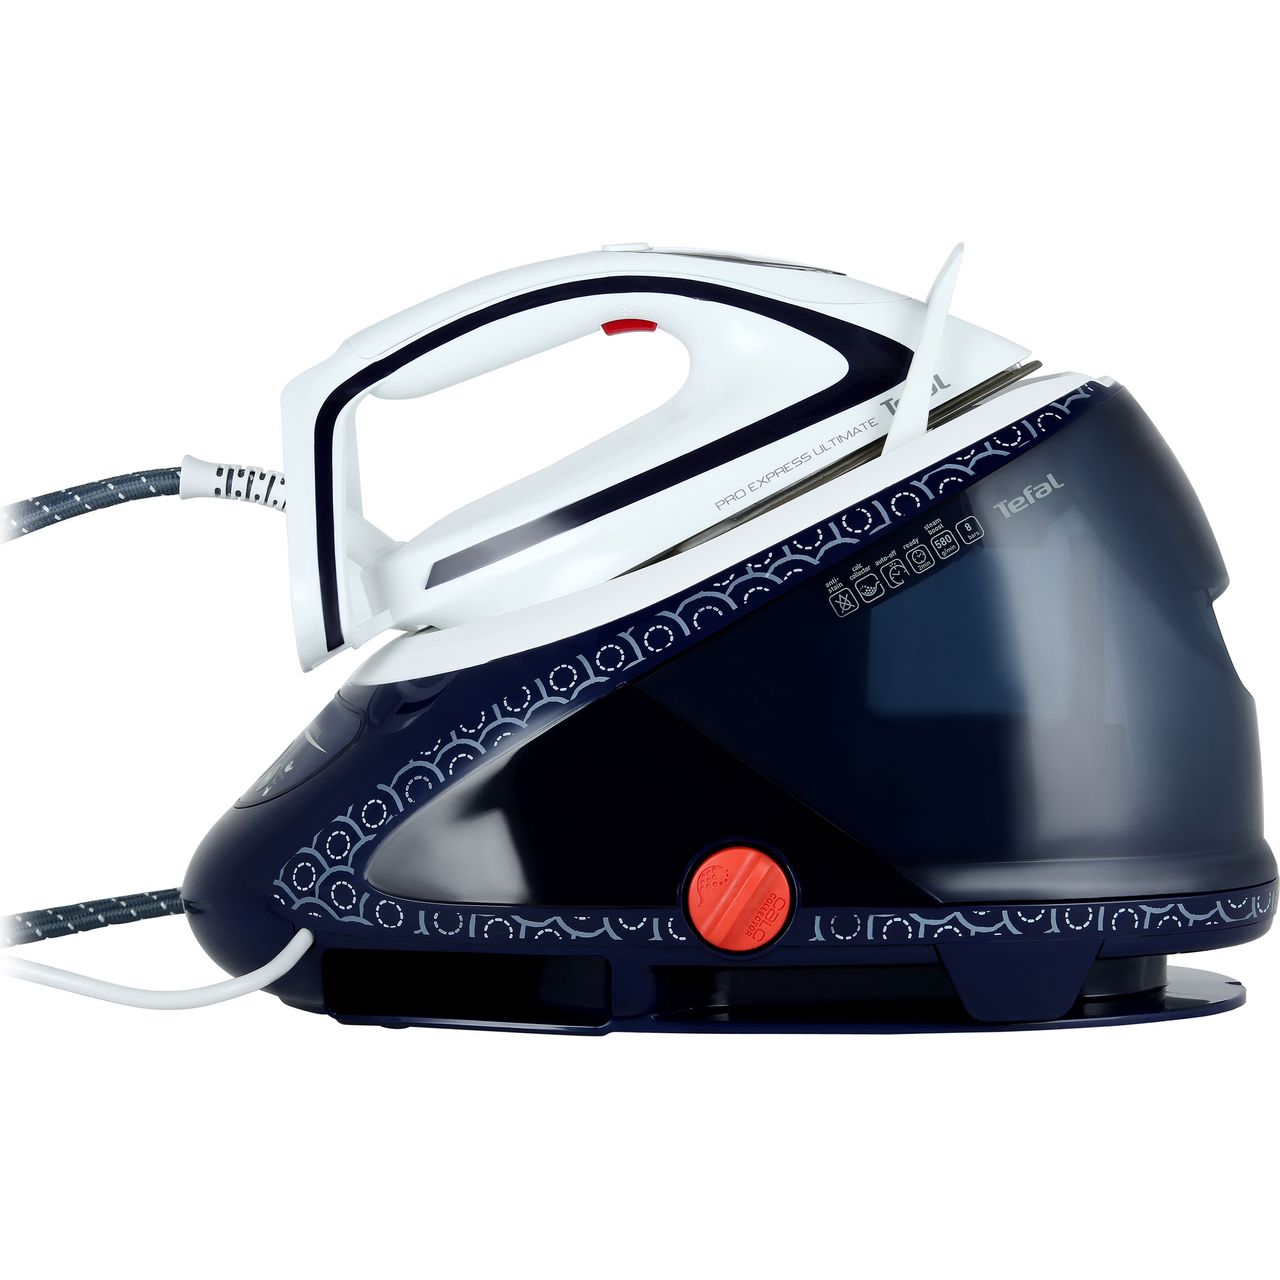 Tefal Pro Express Ultimate High Pressure GV9580 Pressurised Steam Generator Iron Review